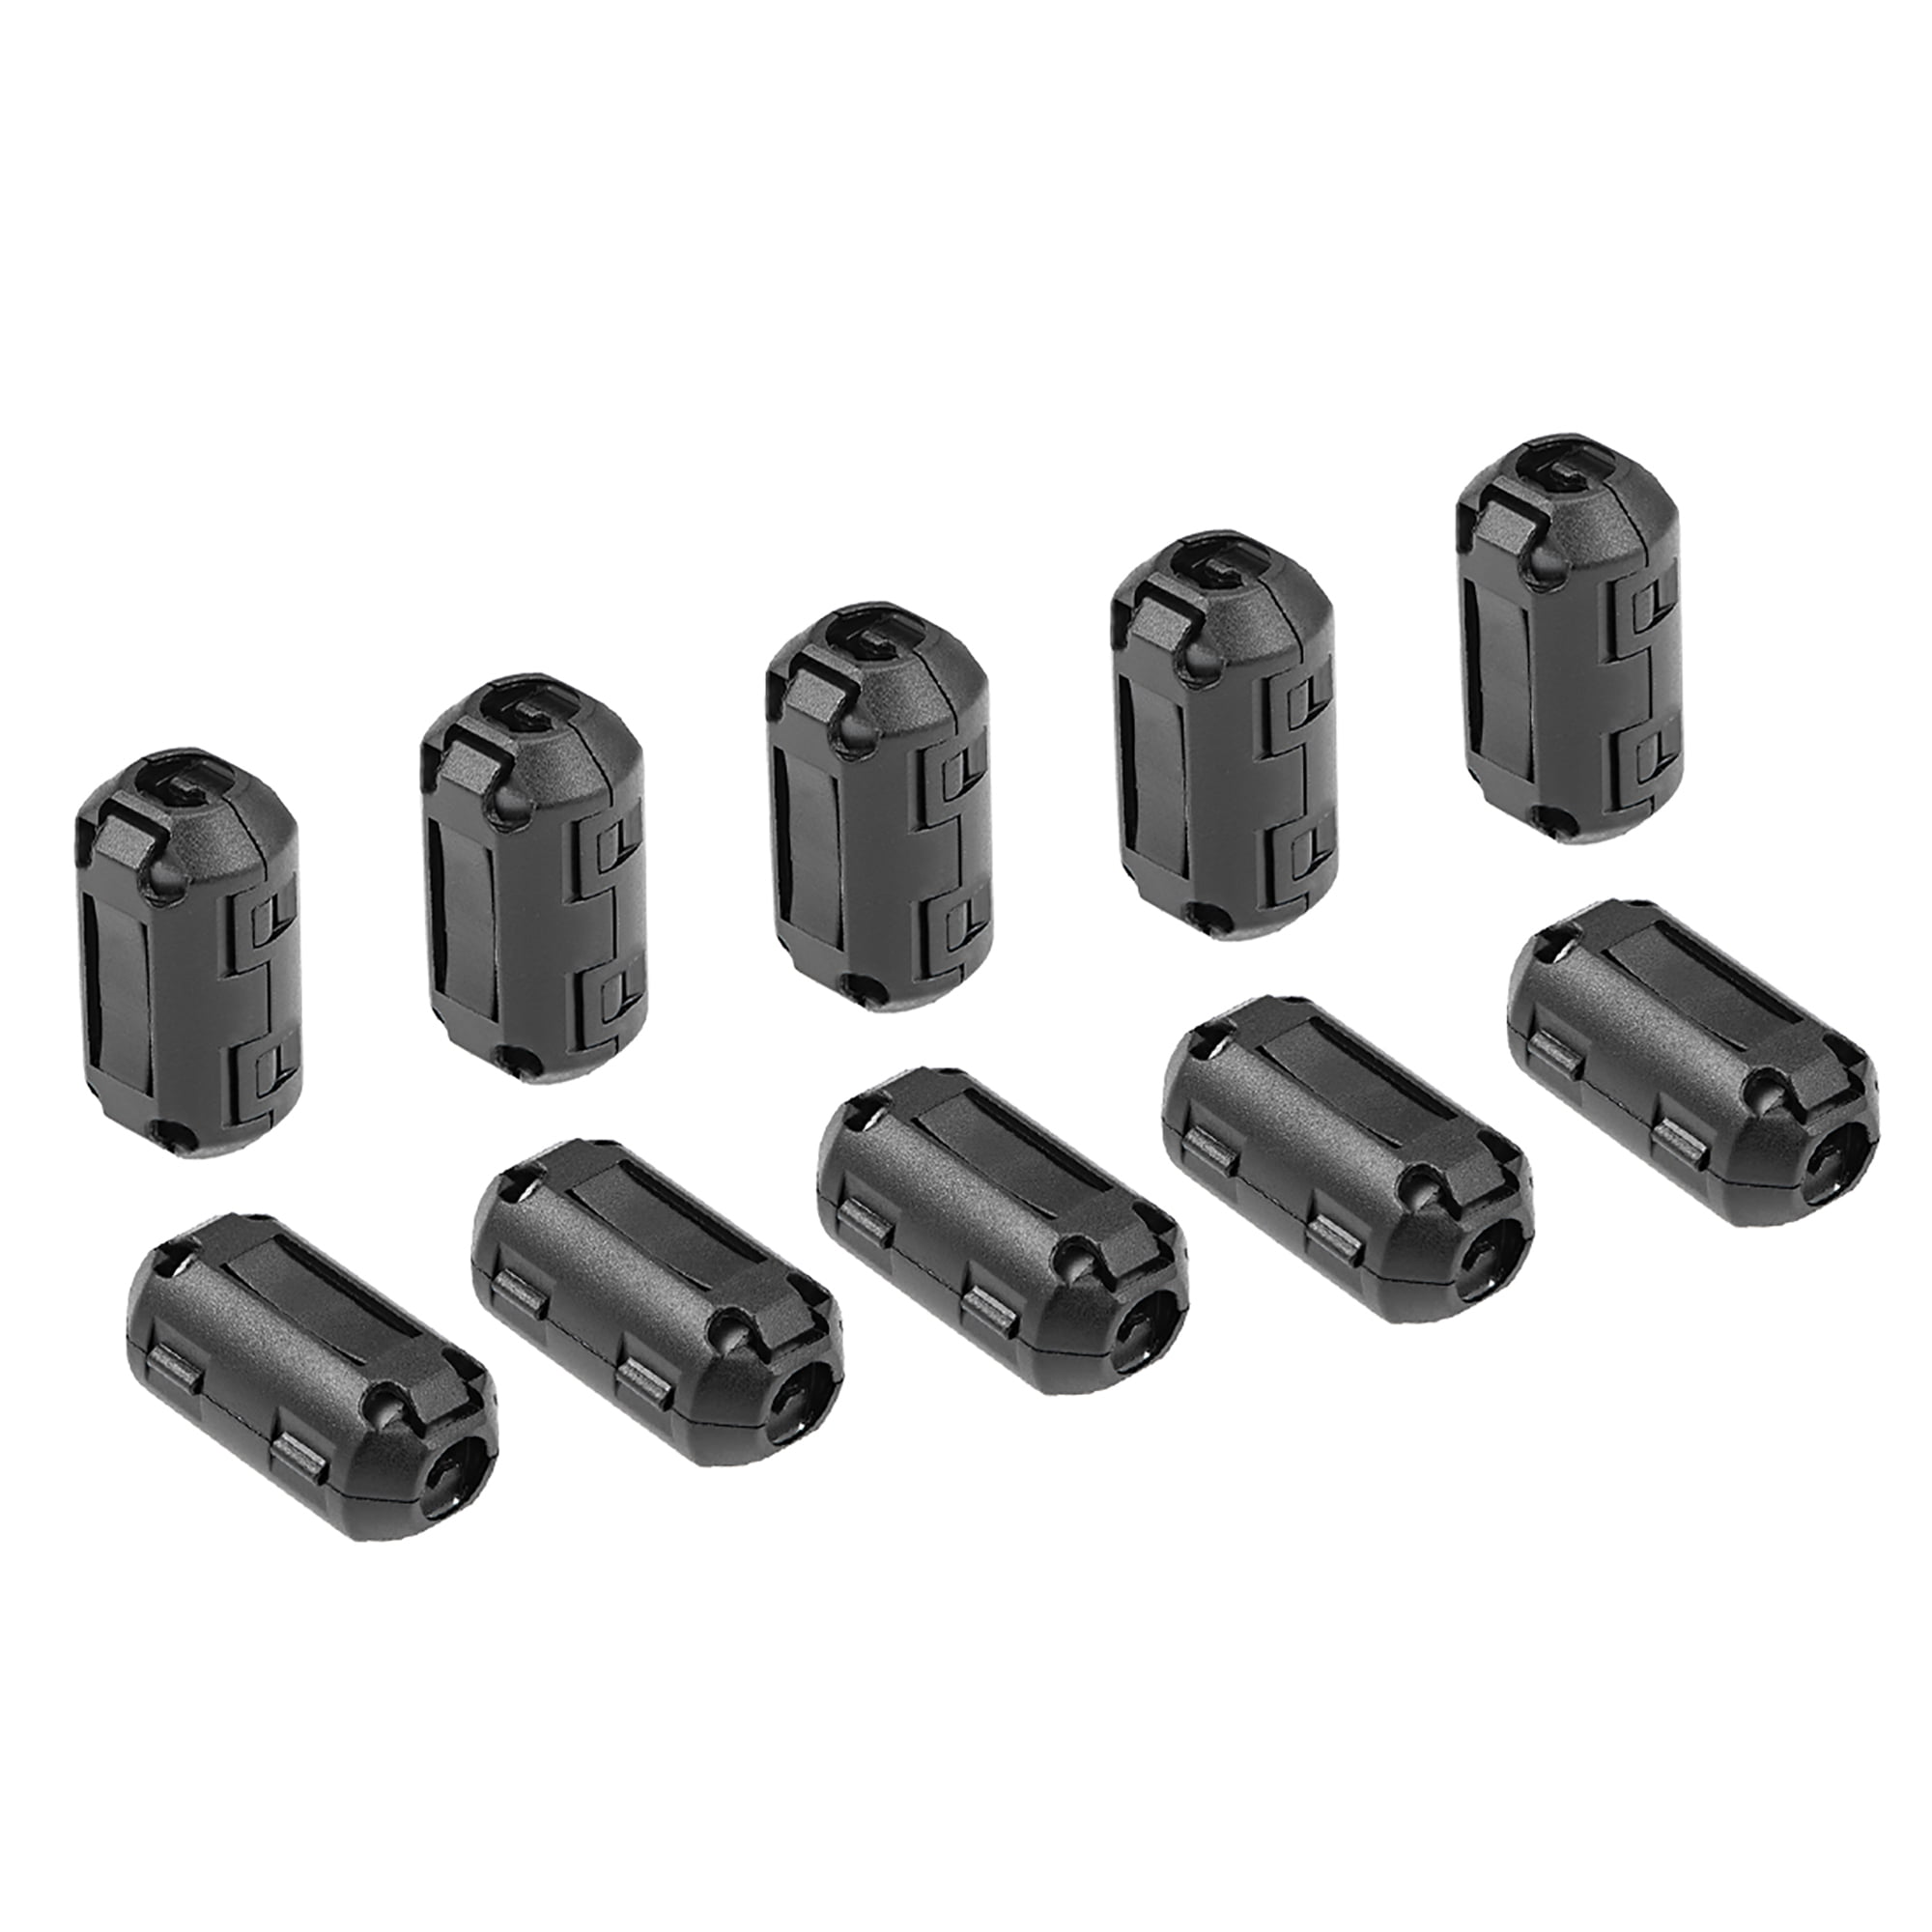 TN008 Pack of 10 9mm Inner Diameter Clip-on Ferrite Core Ring Bead Anti-Interference High-Frequency Filter RFI EMI Noise Suppressor Cable Clip Topnisus